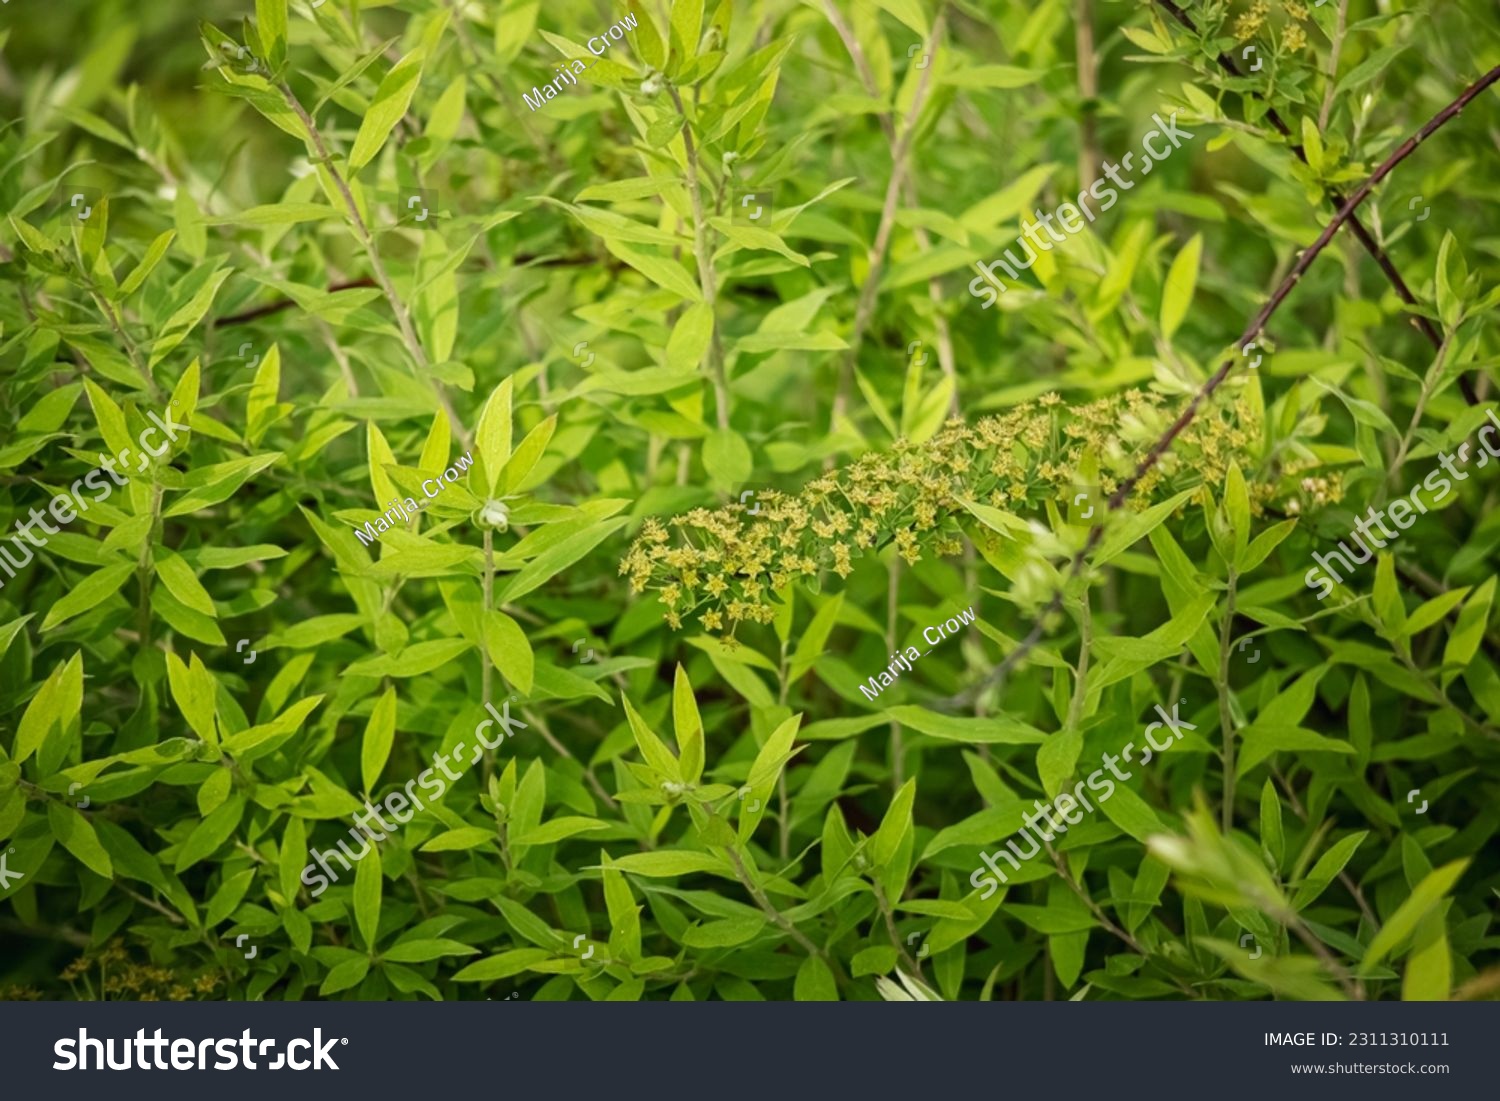 Lemon verbena hedge leaves with closed spring buds in sunlight green full screen background #2311310111